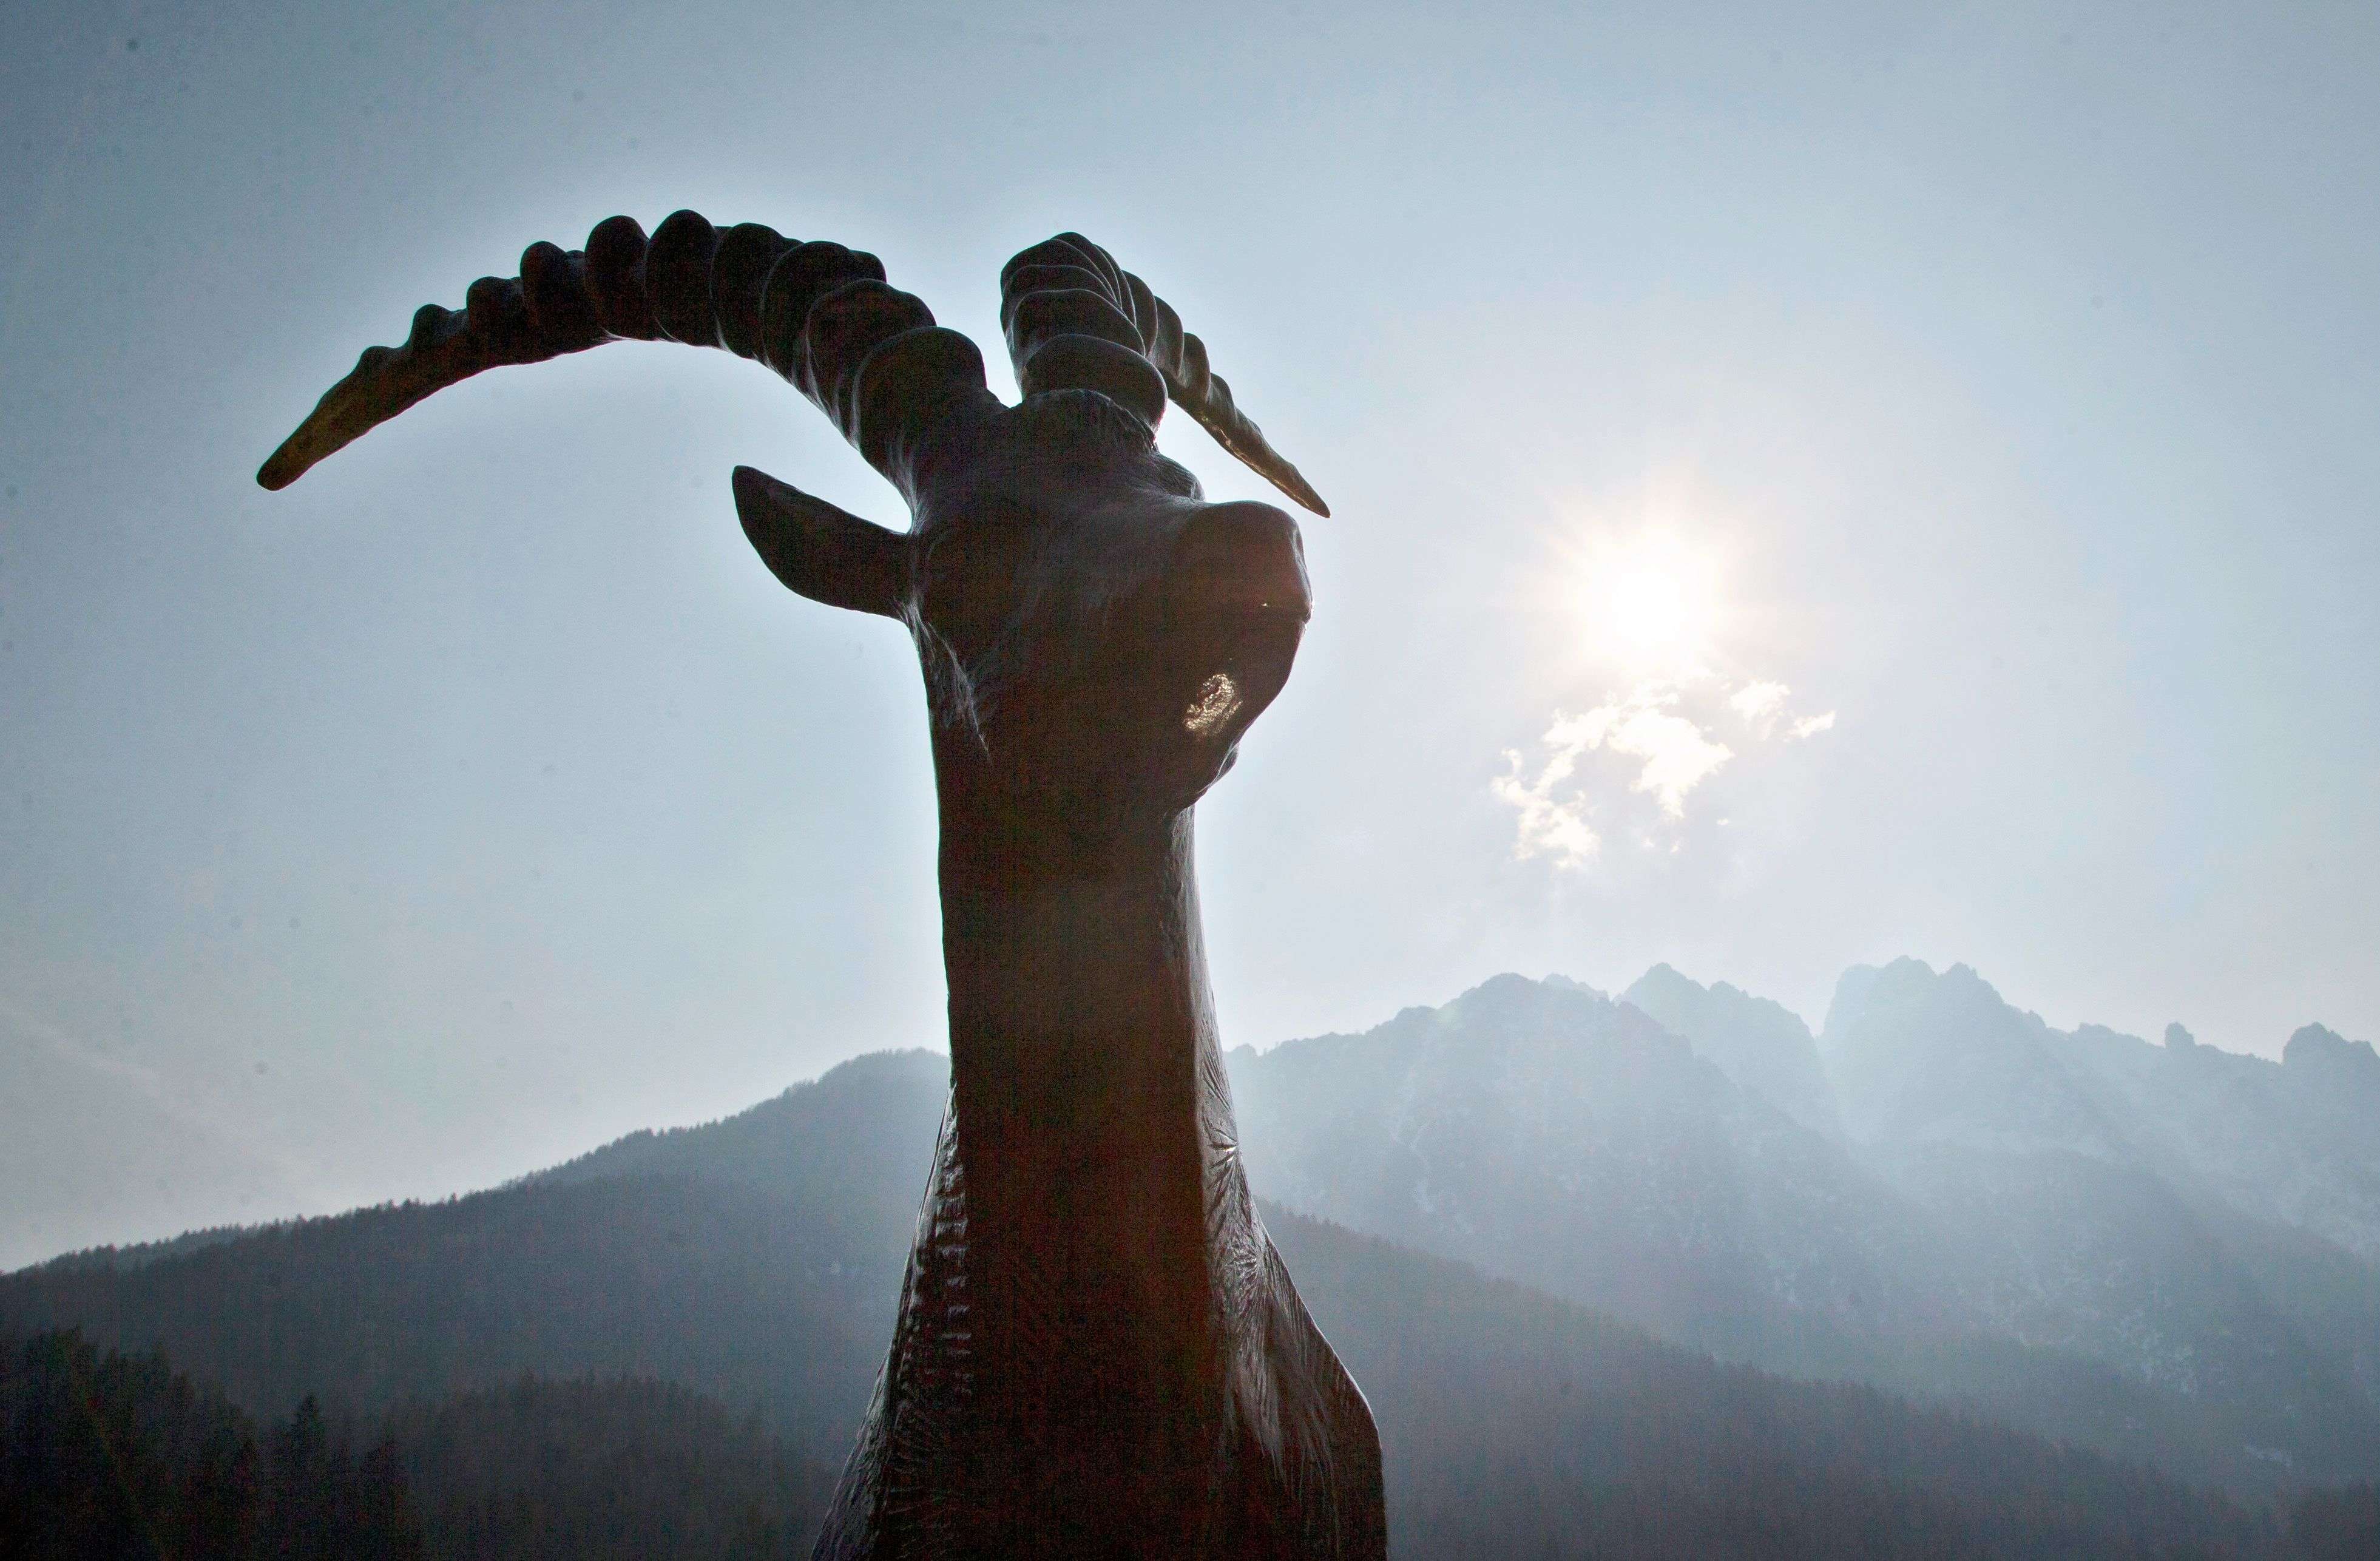 A solar eclipse is seen behind a statue of an ibex in Kranjska Gora, Slovenia. An eclipse is darkening parts of Europe on Friday in a rare solar event that won't be repeated for more than a decade. (AP Photo/Darko Bandic)